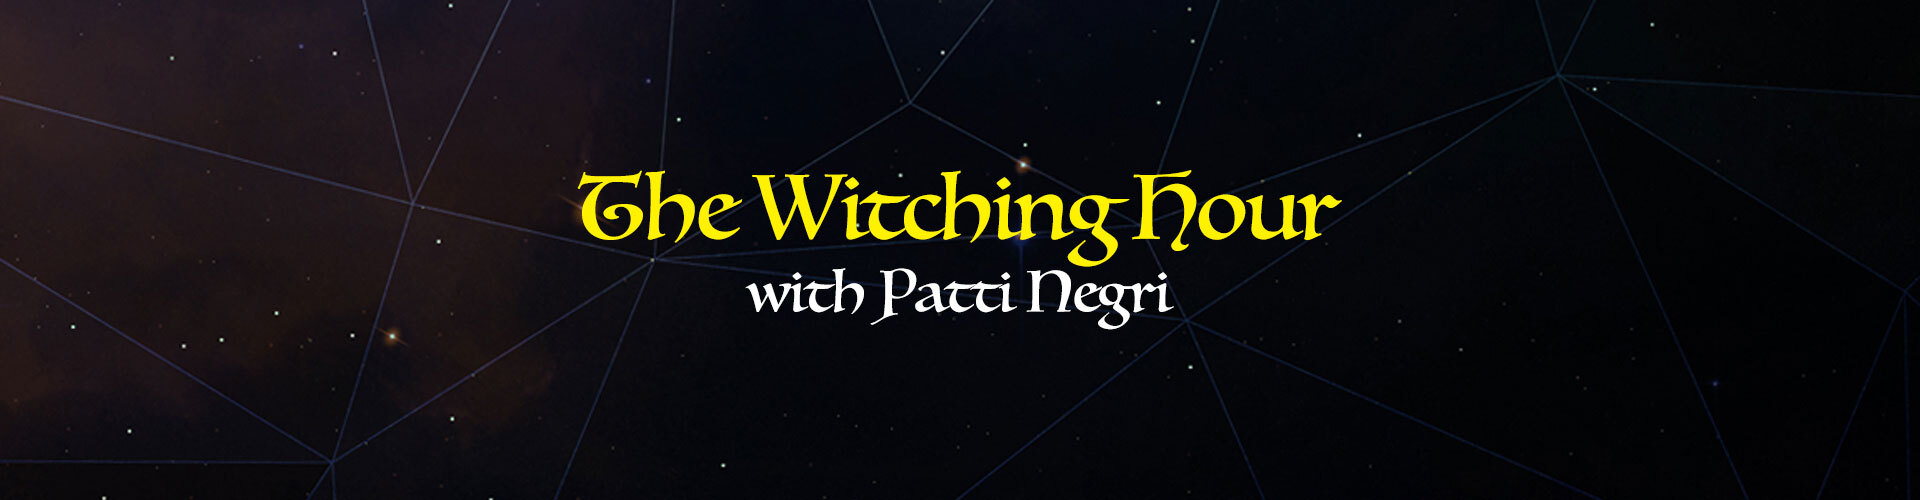 The Witching Hour with Patti Negri